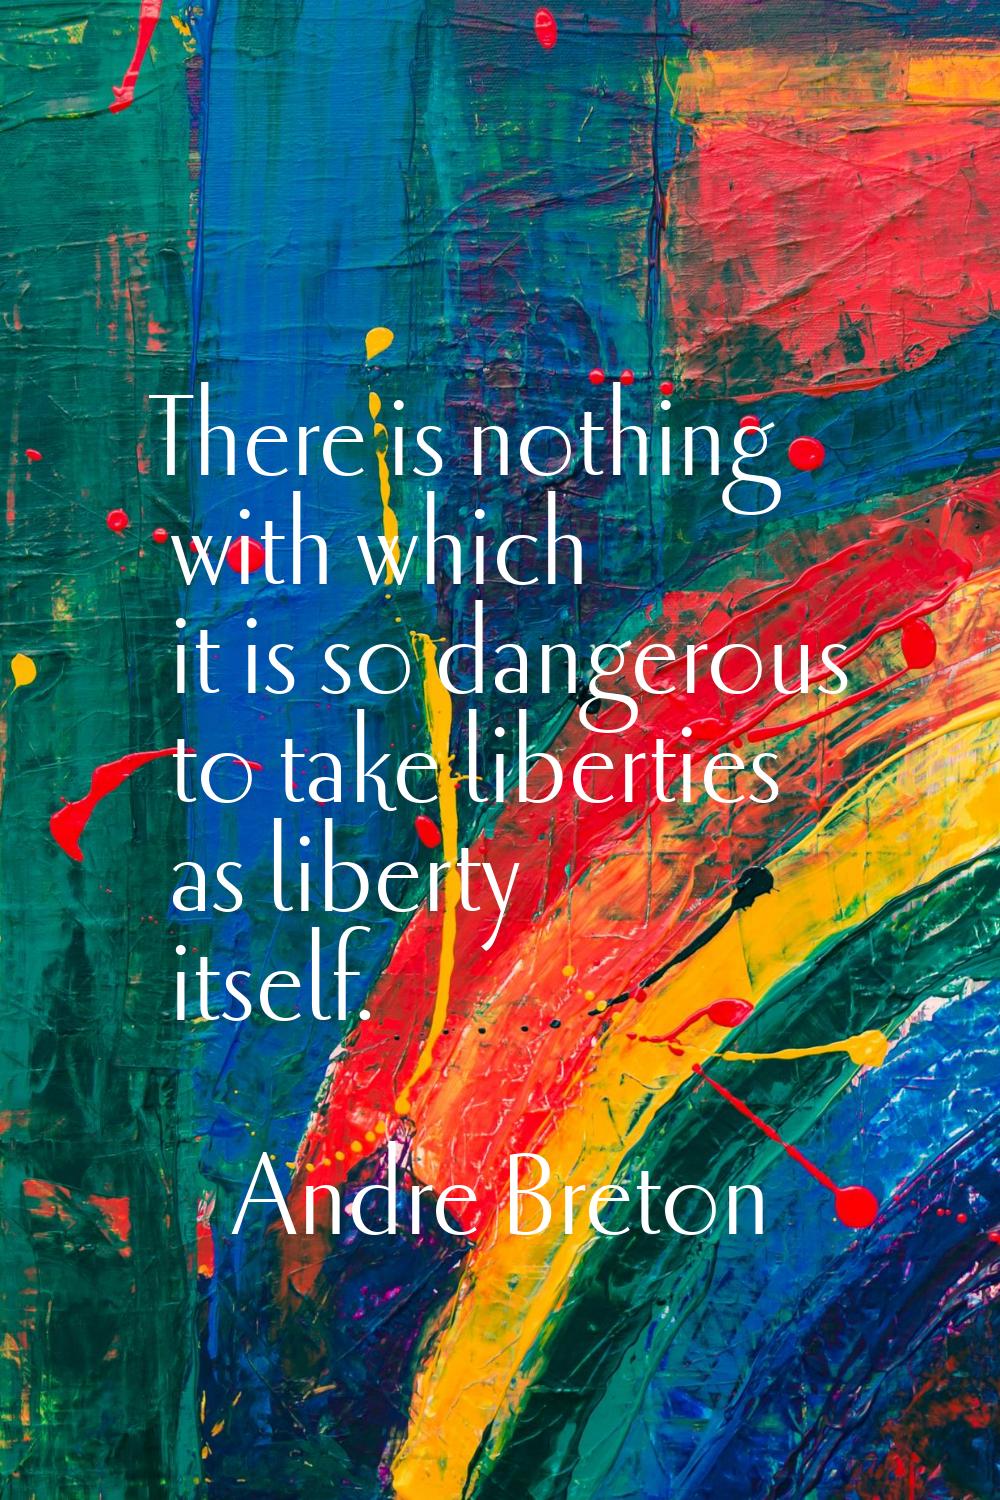 There is nothing with which it is so dangerous to take liberties as liberty itself.